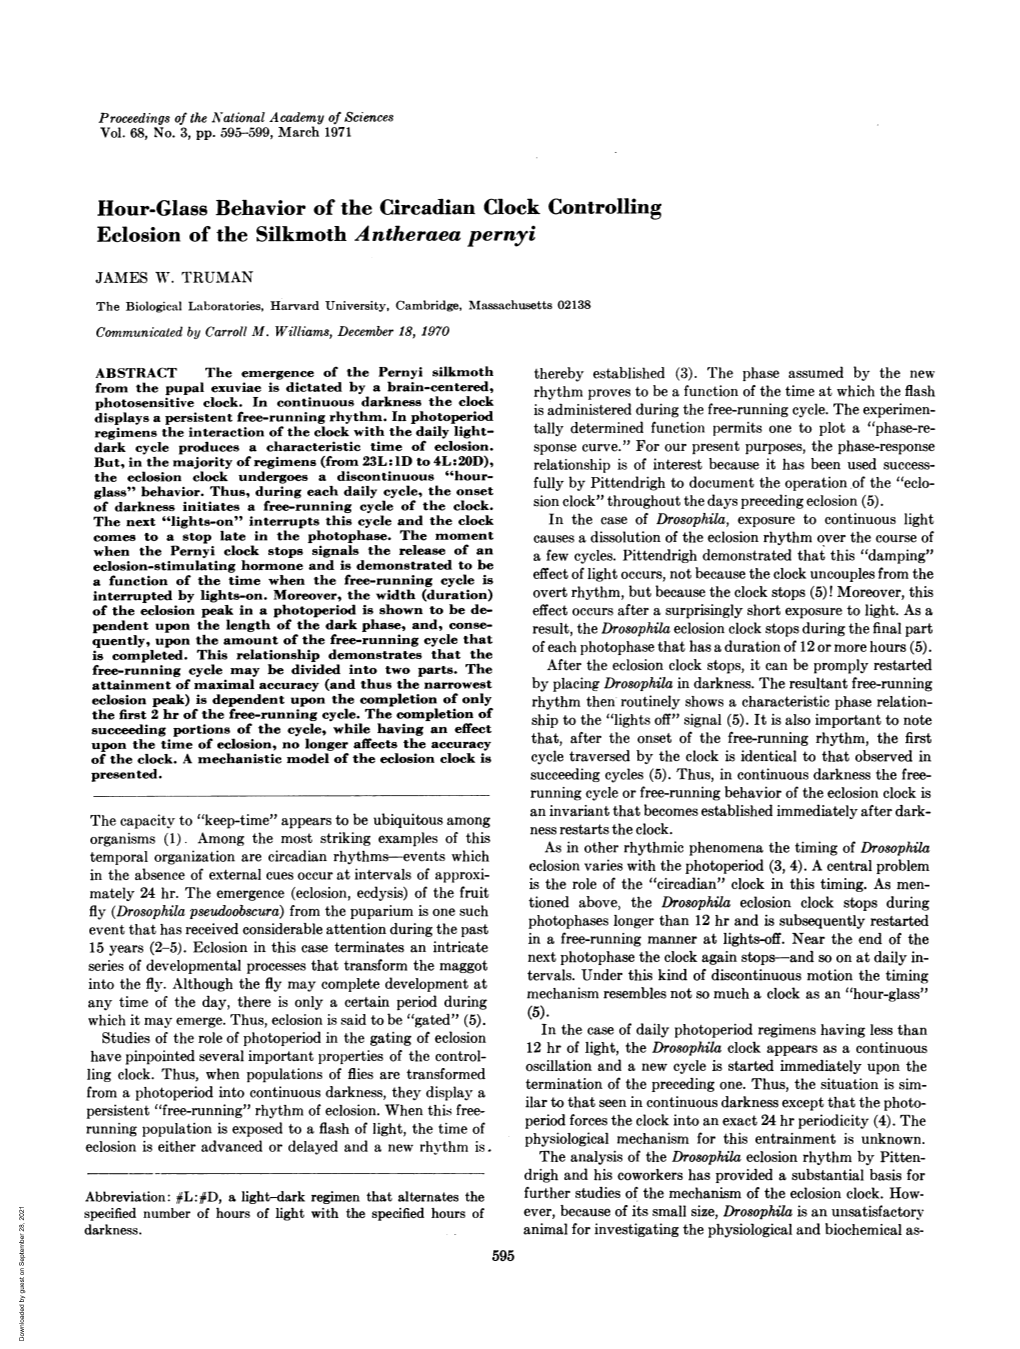 Hour-Glass Behavior of the Circadian Clock Controlling Eclosion of the Silkmoth Antheraea Pernyi